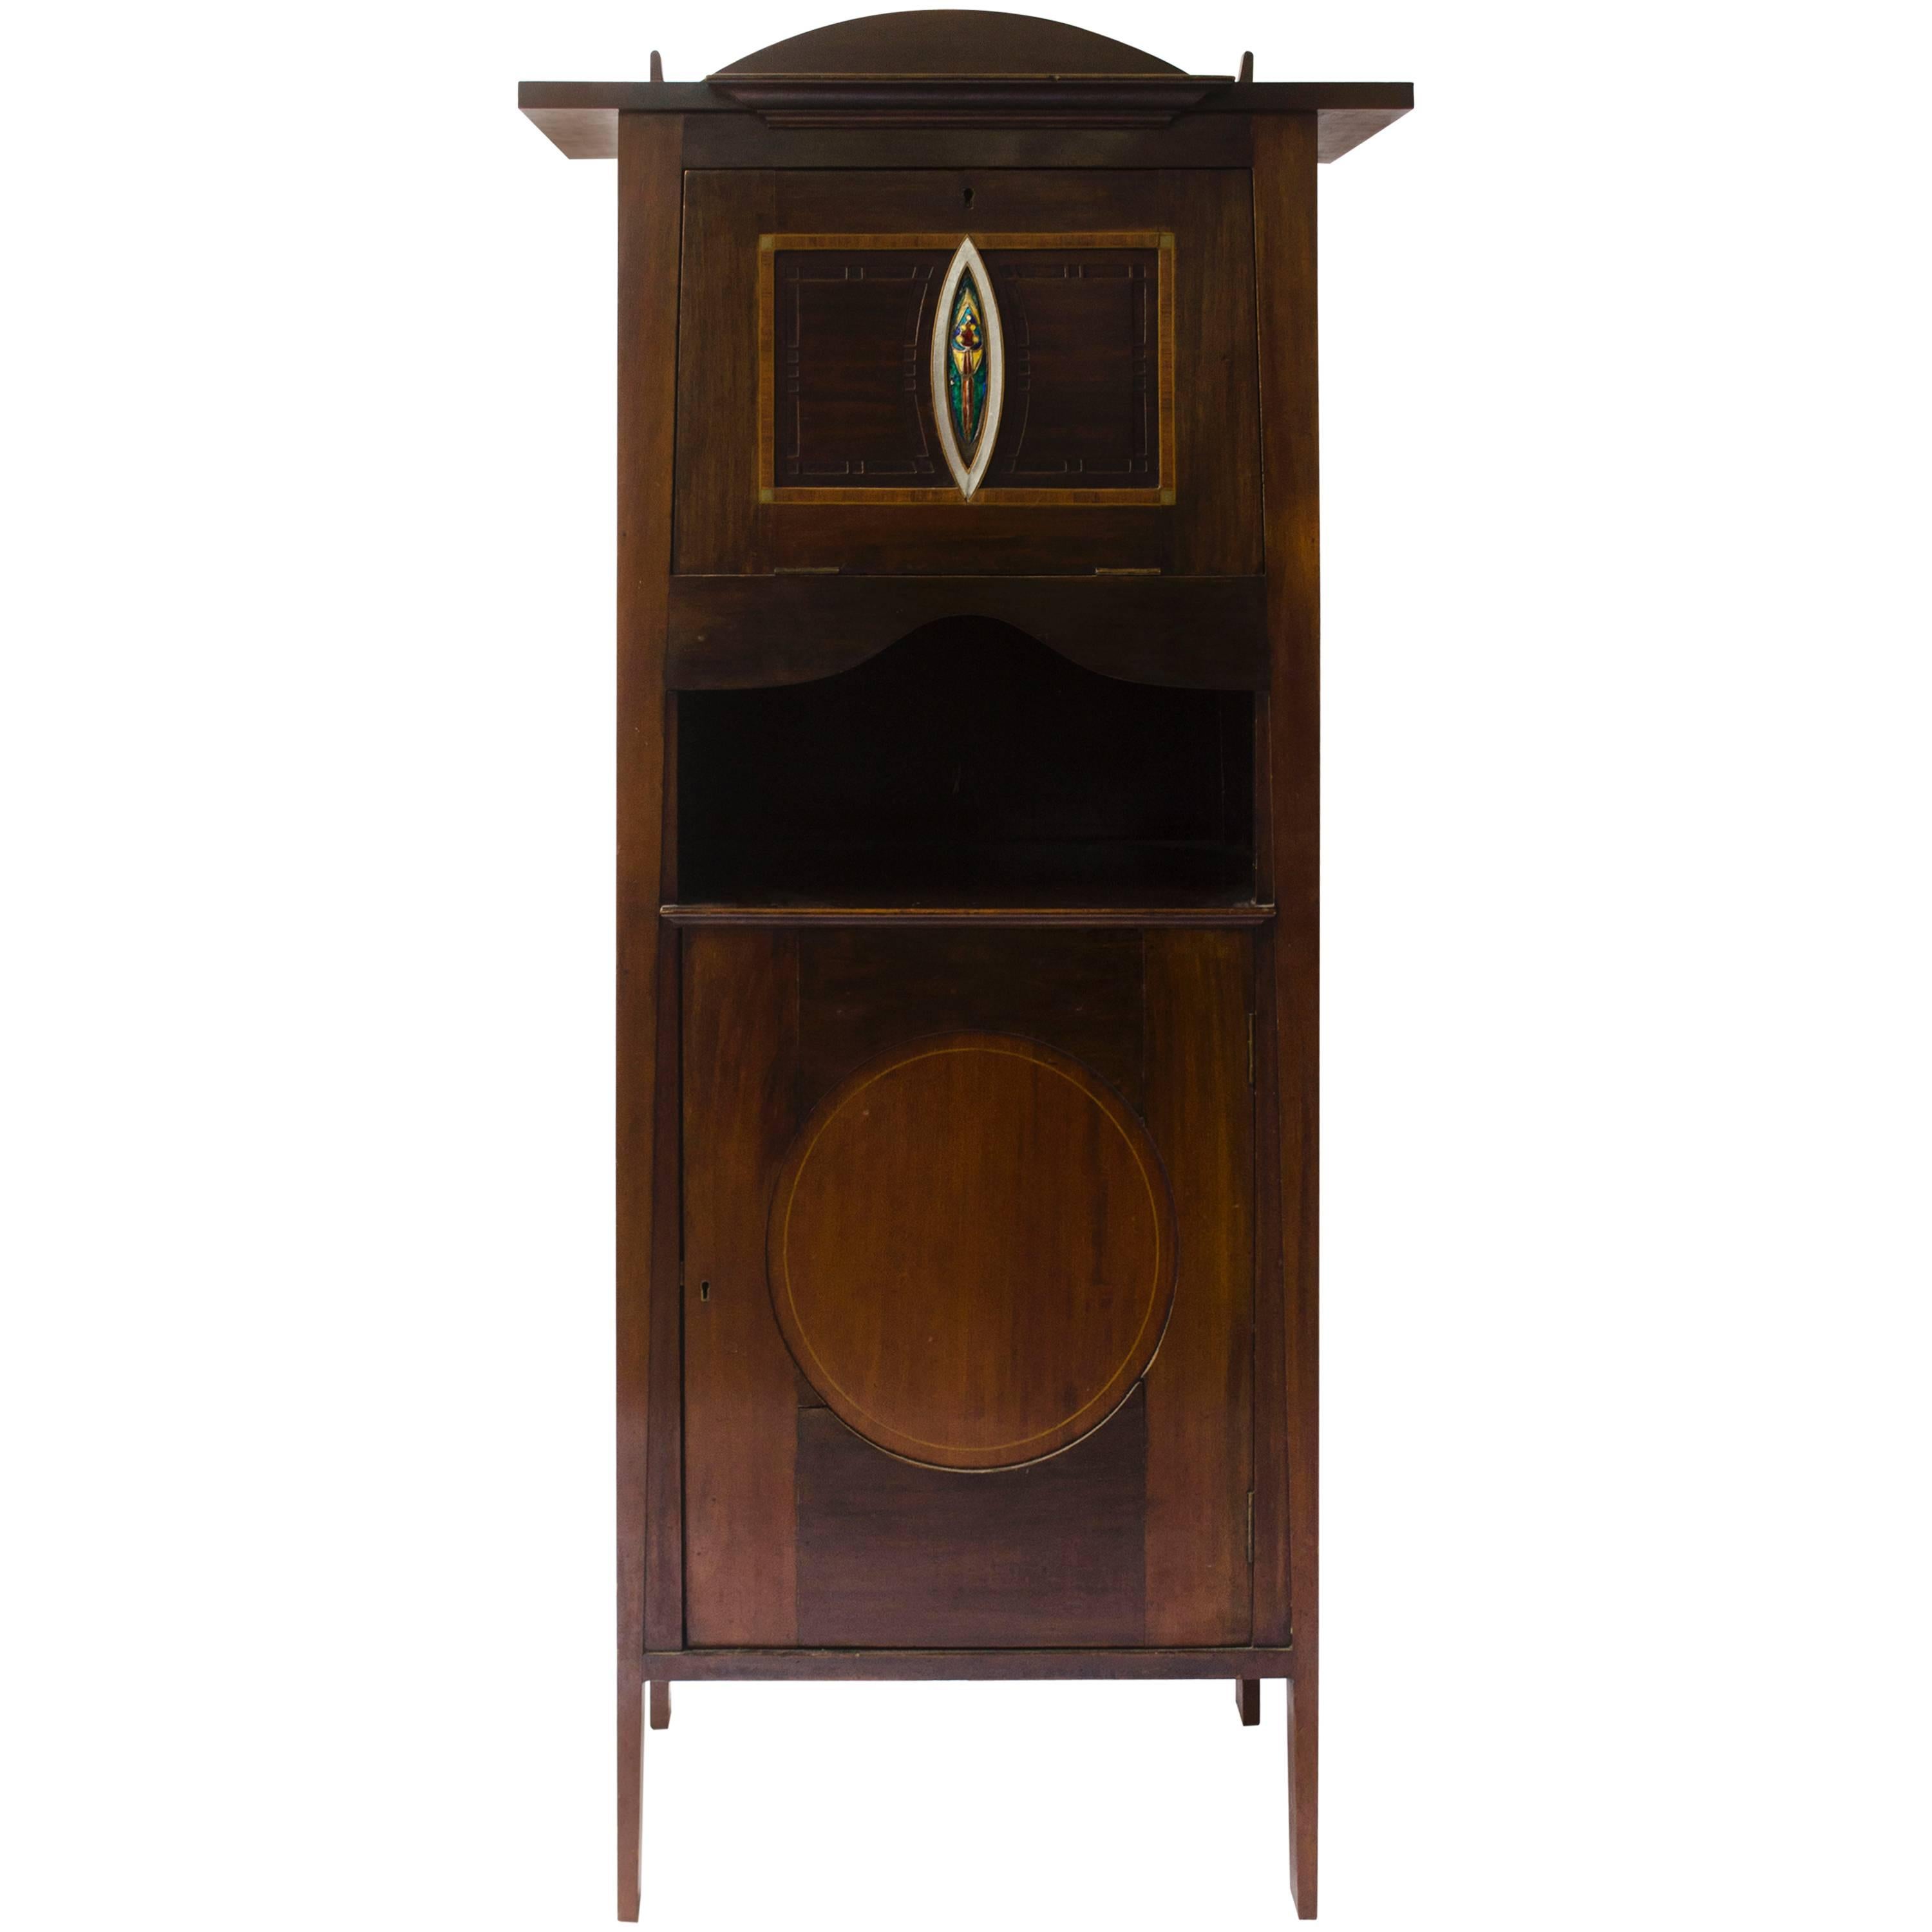 G M Ellwood. J S Henry & J M King attr, An Arts & Crafts Mahogany Music Cabinet. For Sale